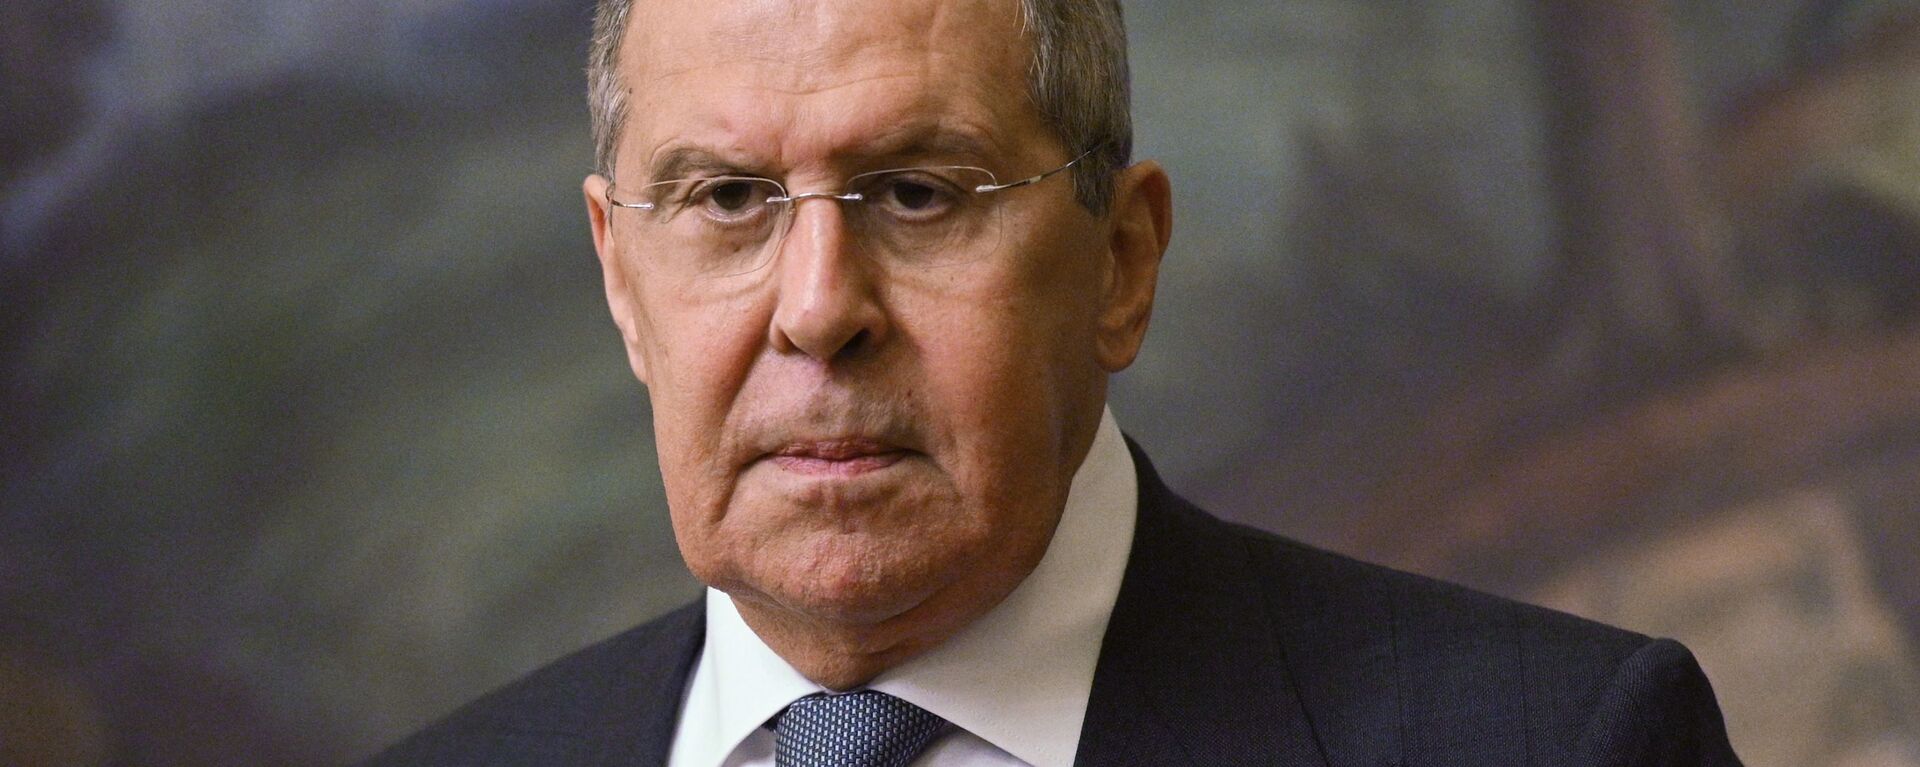 Russian Foreign Minister Sergei Lavrov at a press conference following a meeting in Moscow with the Minister of Foreign Affairs of the Kingdom of Bahrain Abdel Latyf bin Rashid Az-Zayani. - Sputnik International, 1920, 06.07.2021